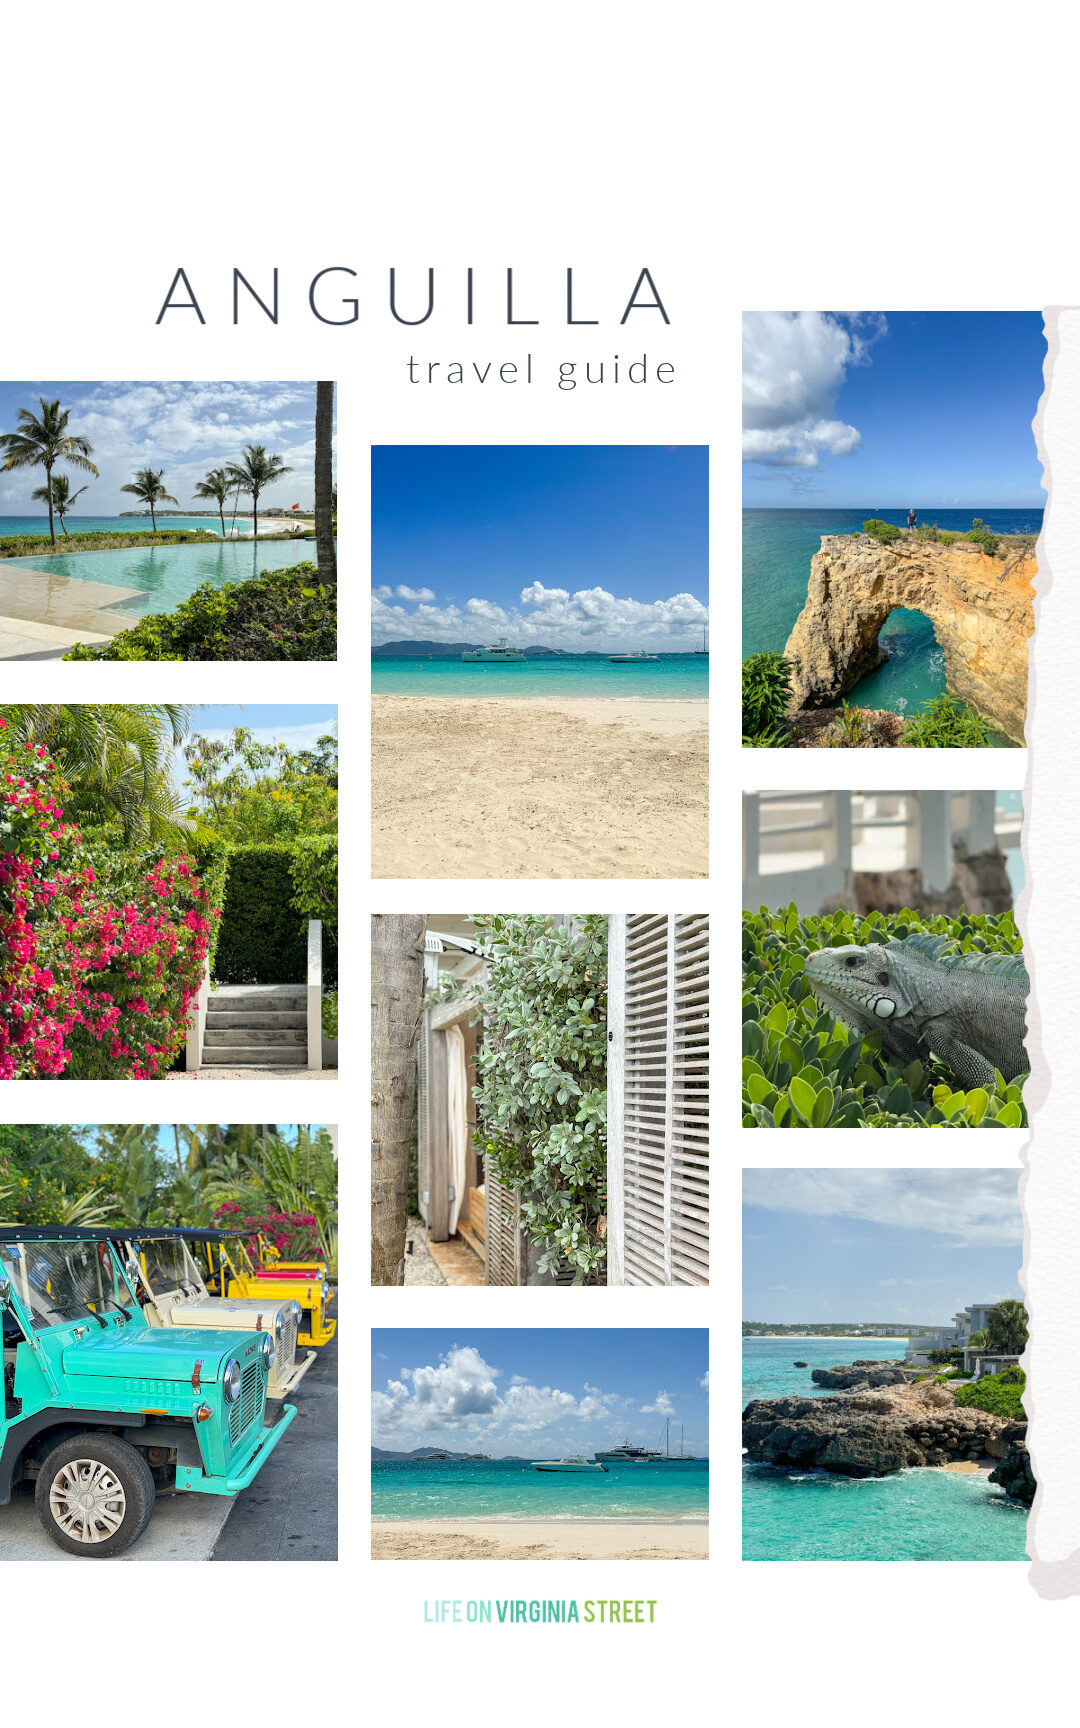 A thorough travel guide focusing on what to do, where to eat, and where to stay in Anguilla! Includes lot of images of the island including the beaches, restaurants, and more!